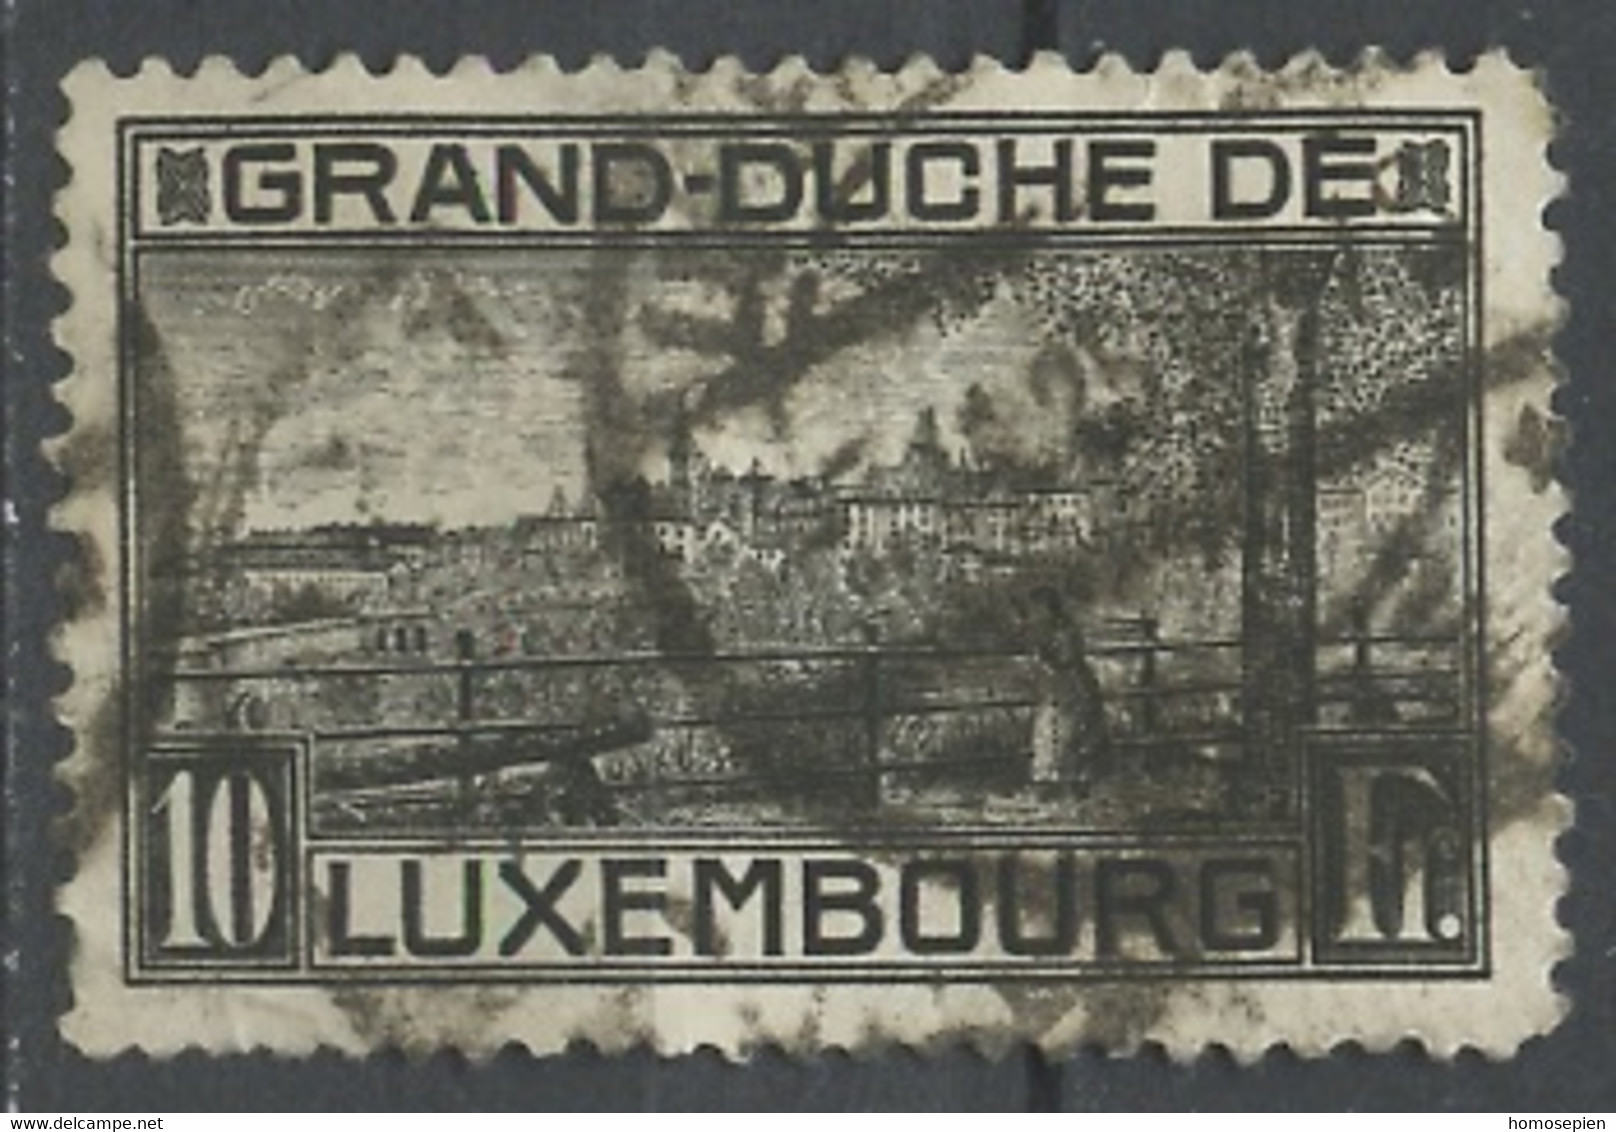 Luxembourg - Luxemburg 1923 Y&T N°141 - Michel N°143 (o) - 10f Vue De Luxembourg - 1921-27 Charlotte Frontansicht